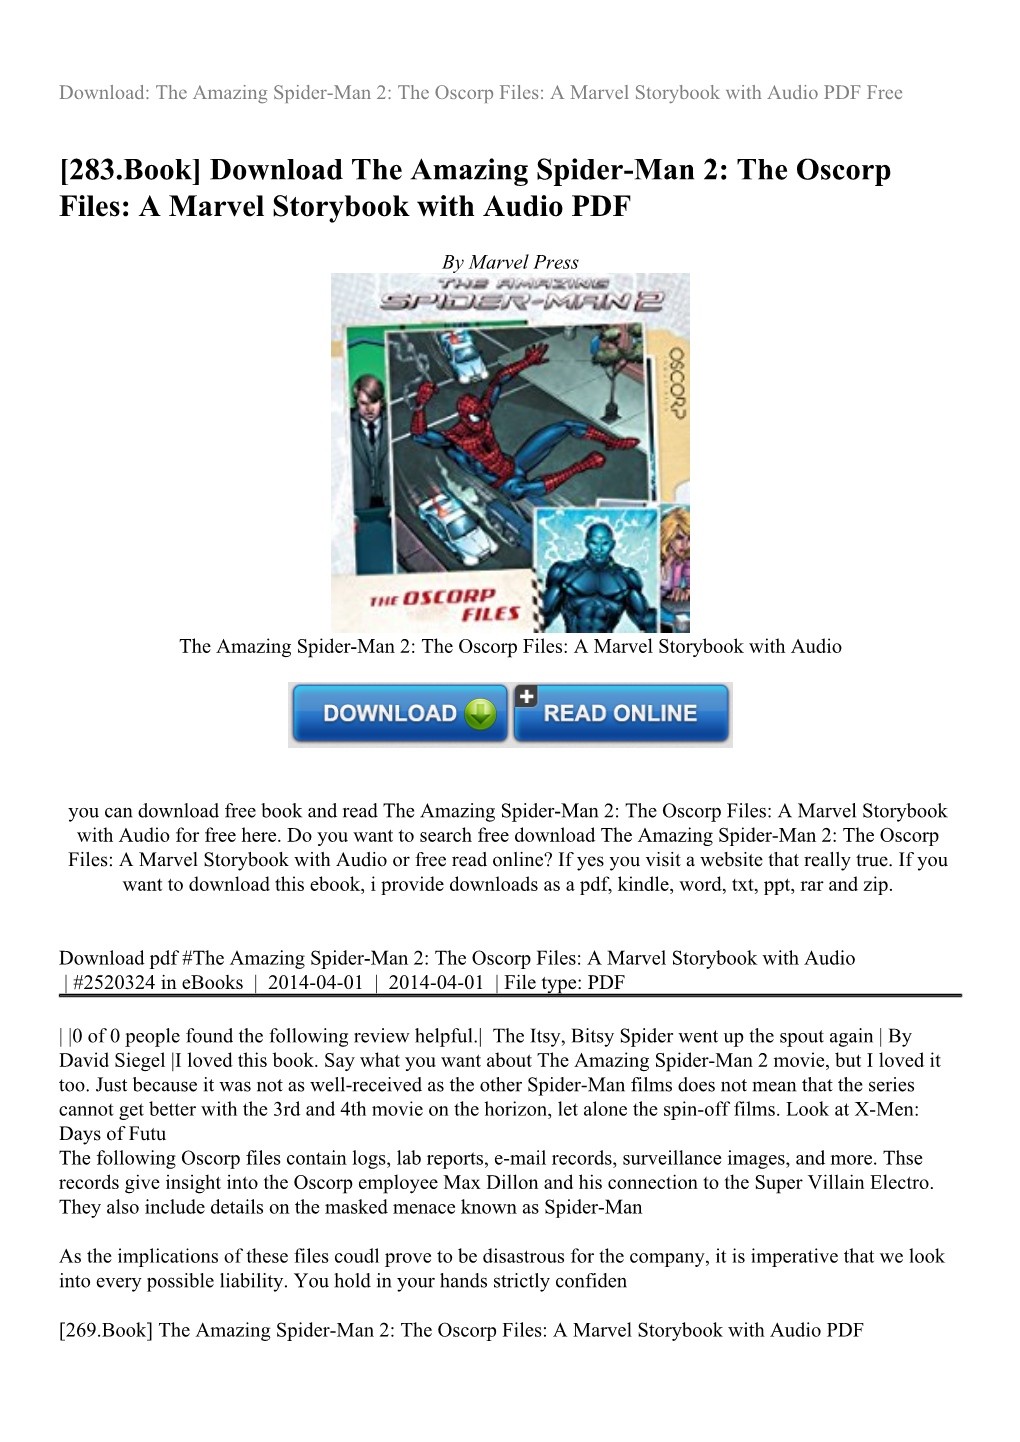 The Oscorp Files: a Marvel Storybook with Audio PDF Free